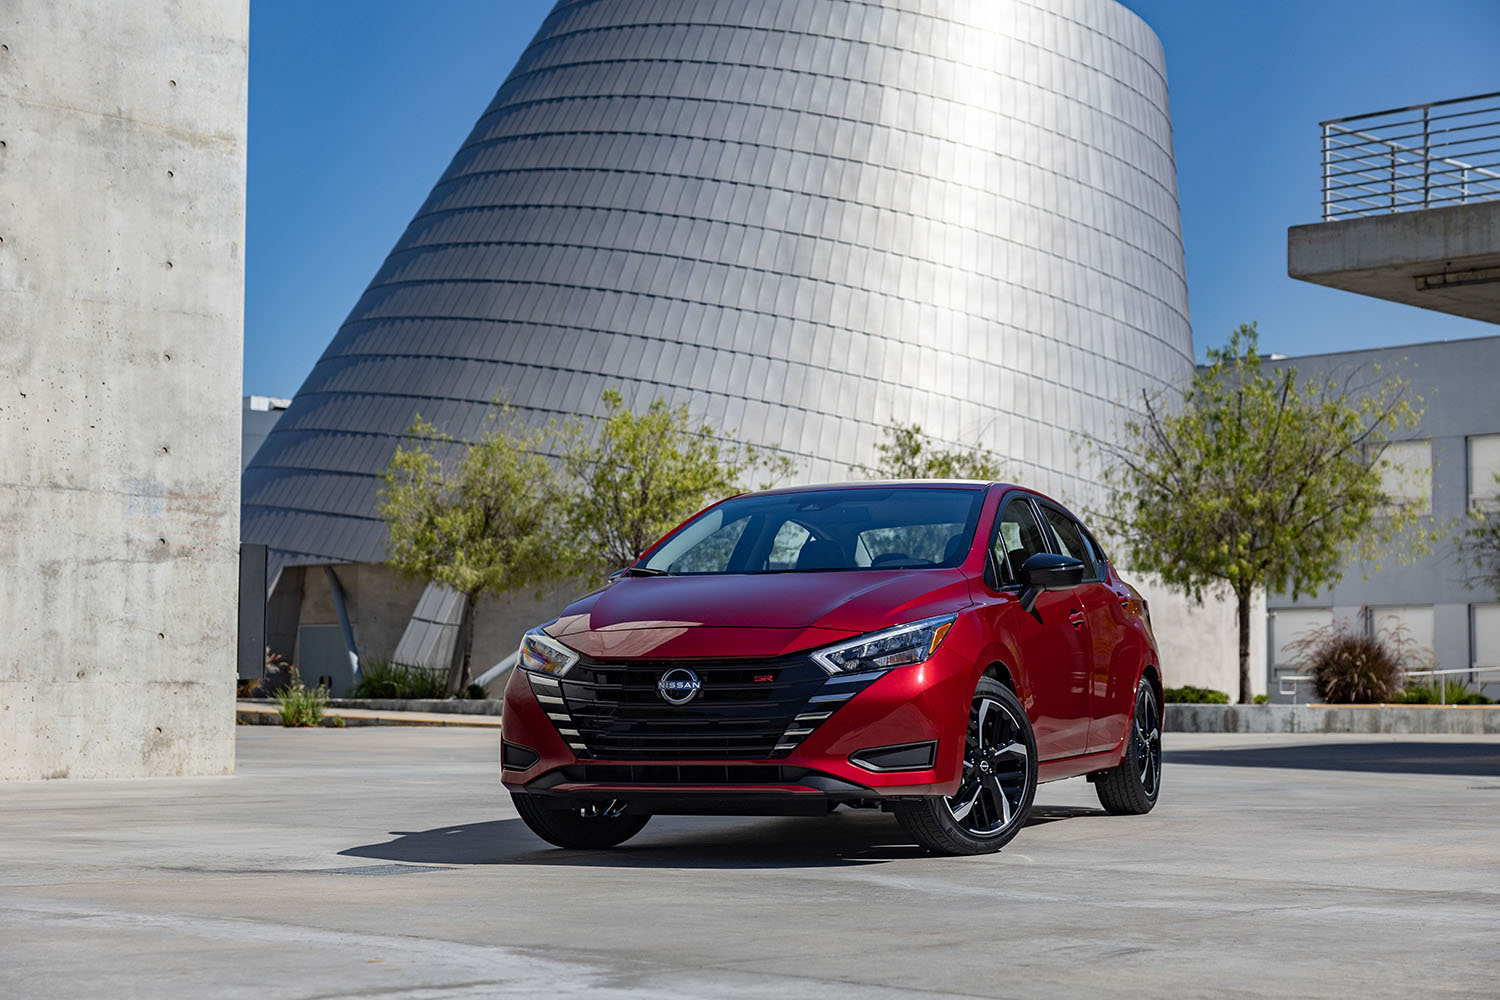 2023 Nissan Versa in red parked in downtown Los Angeles